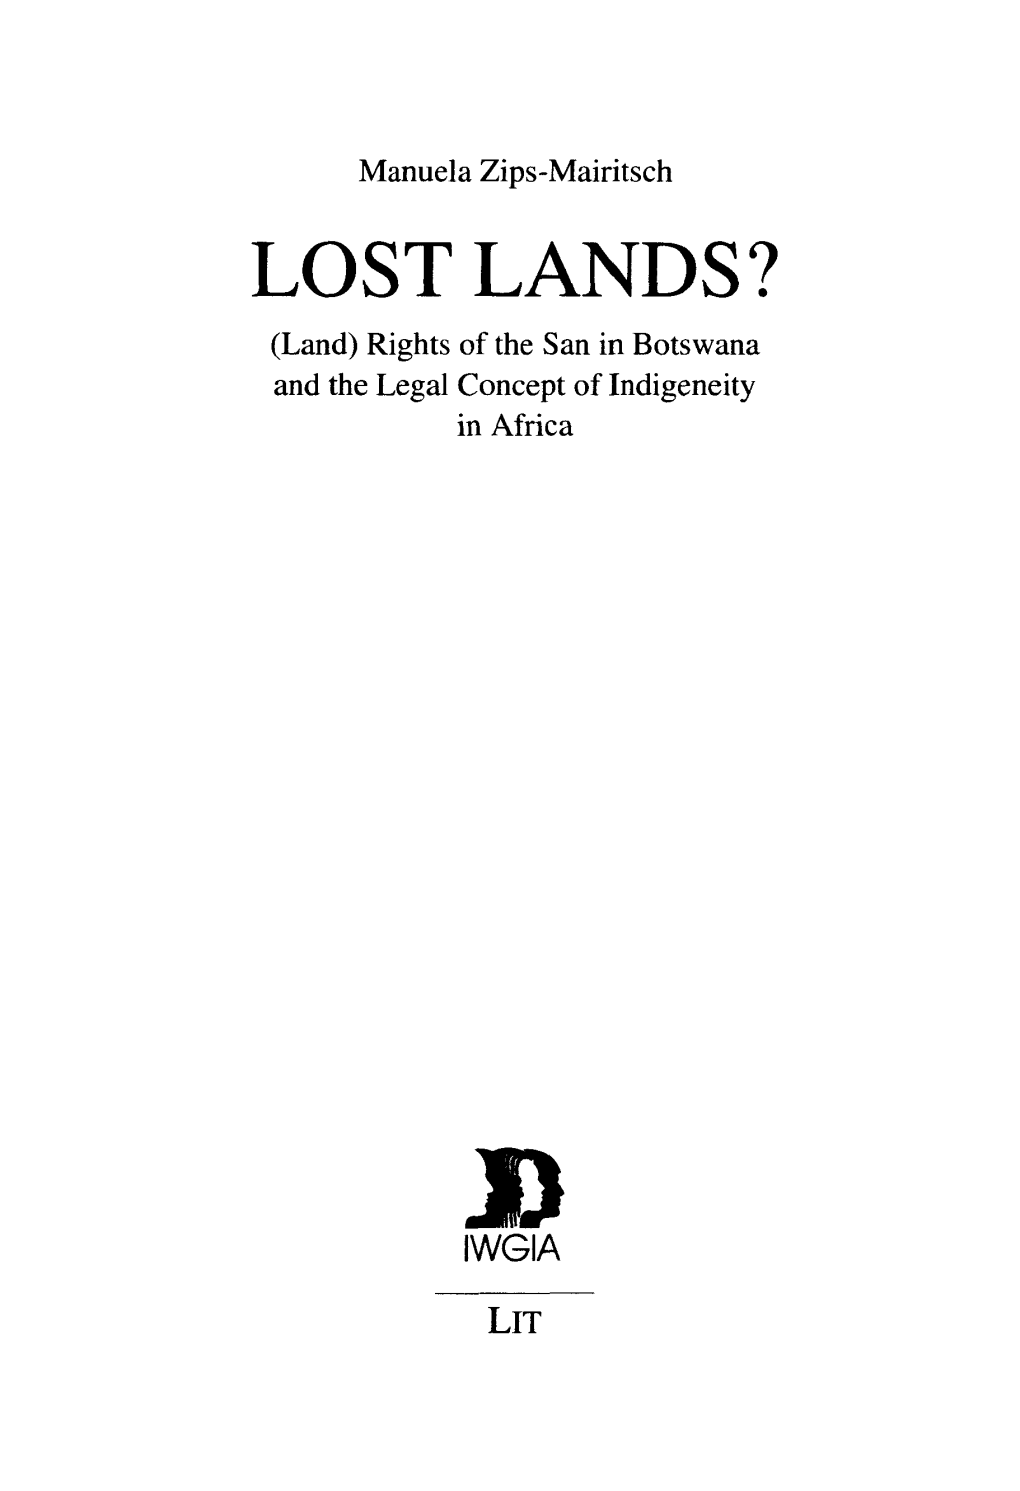 LOST LANDS? (Land) Rights of the San in Botswana and the Legal Concept of Indigeneity in Africa